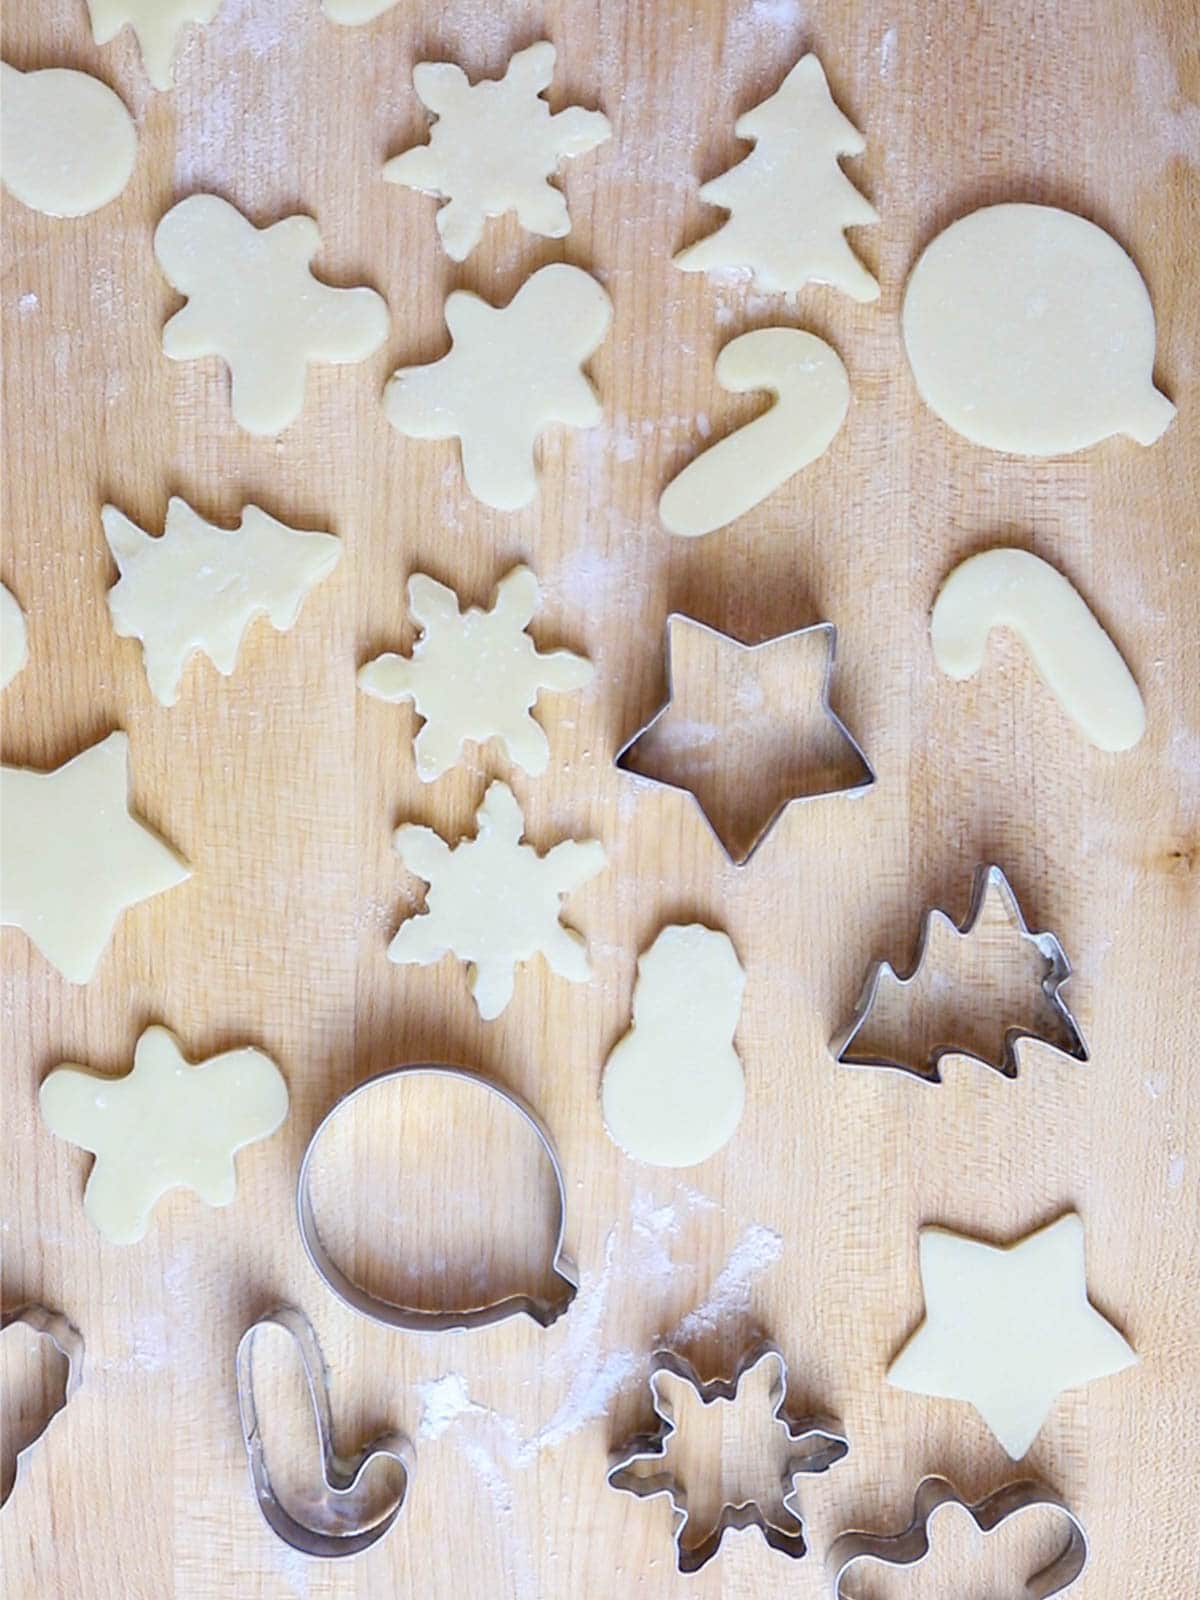 cut out Christmas sugar cookies on a wooden board